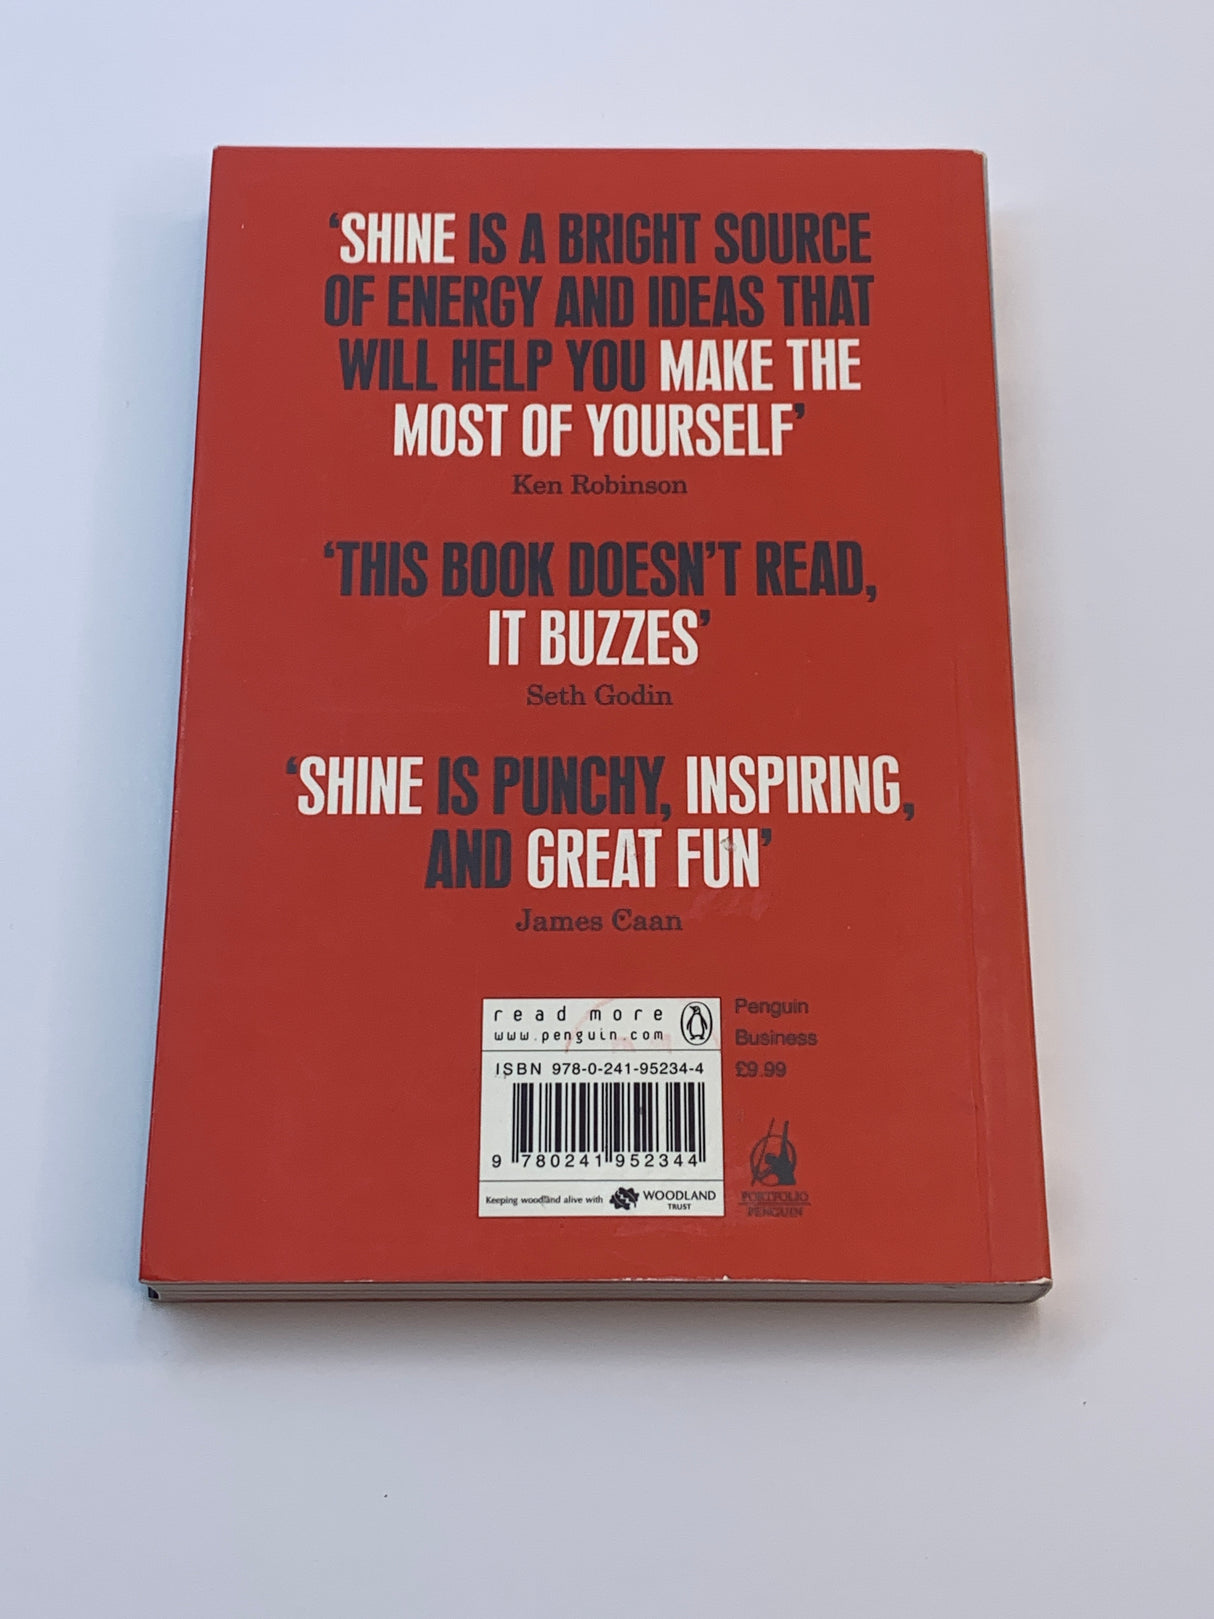 Shine: How to Survive and Thrive at Work